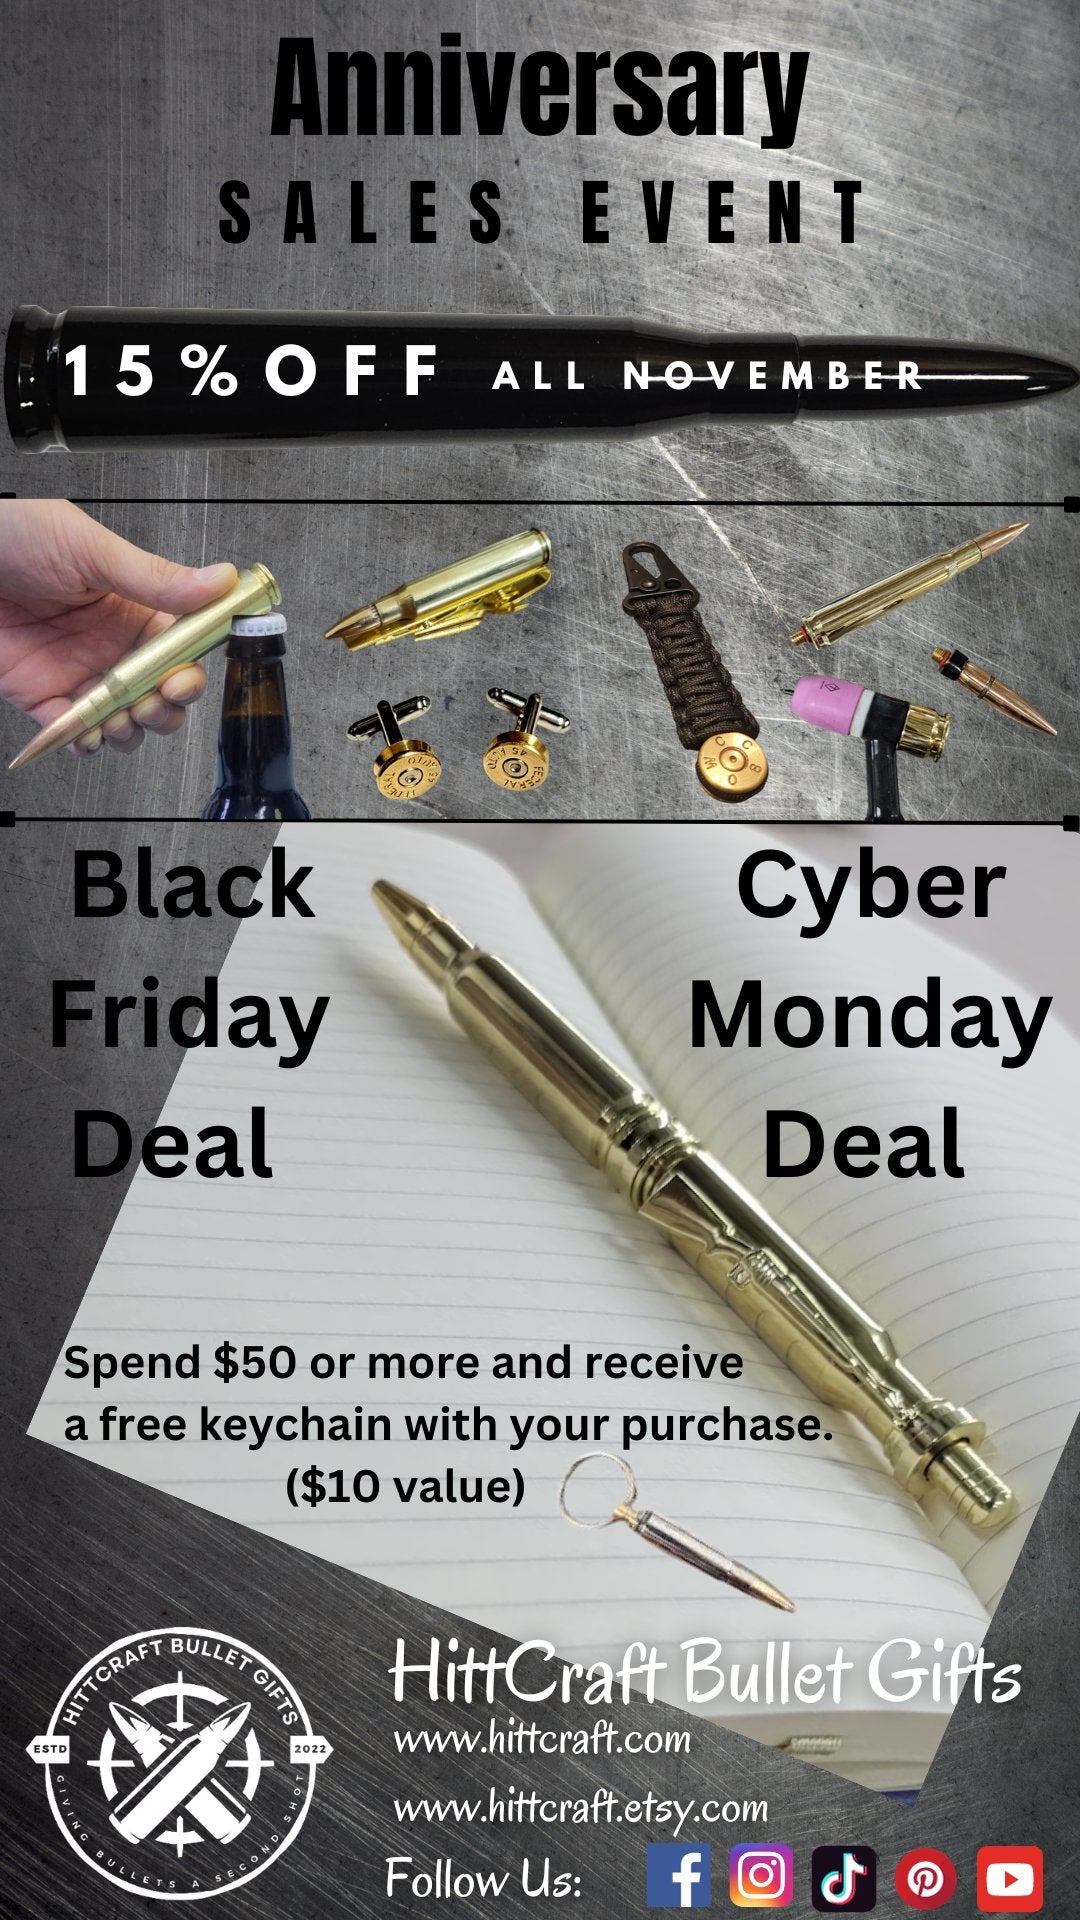 Thank You, Customers! Enjoy 15% Off and Special Black Friday & Cyber Monday Deals at HittCraft Bullet Gifts - HittCraft Bullet Gifts